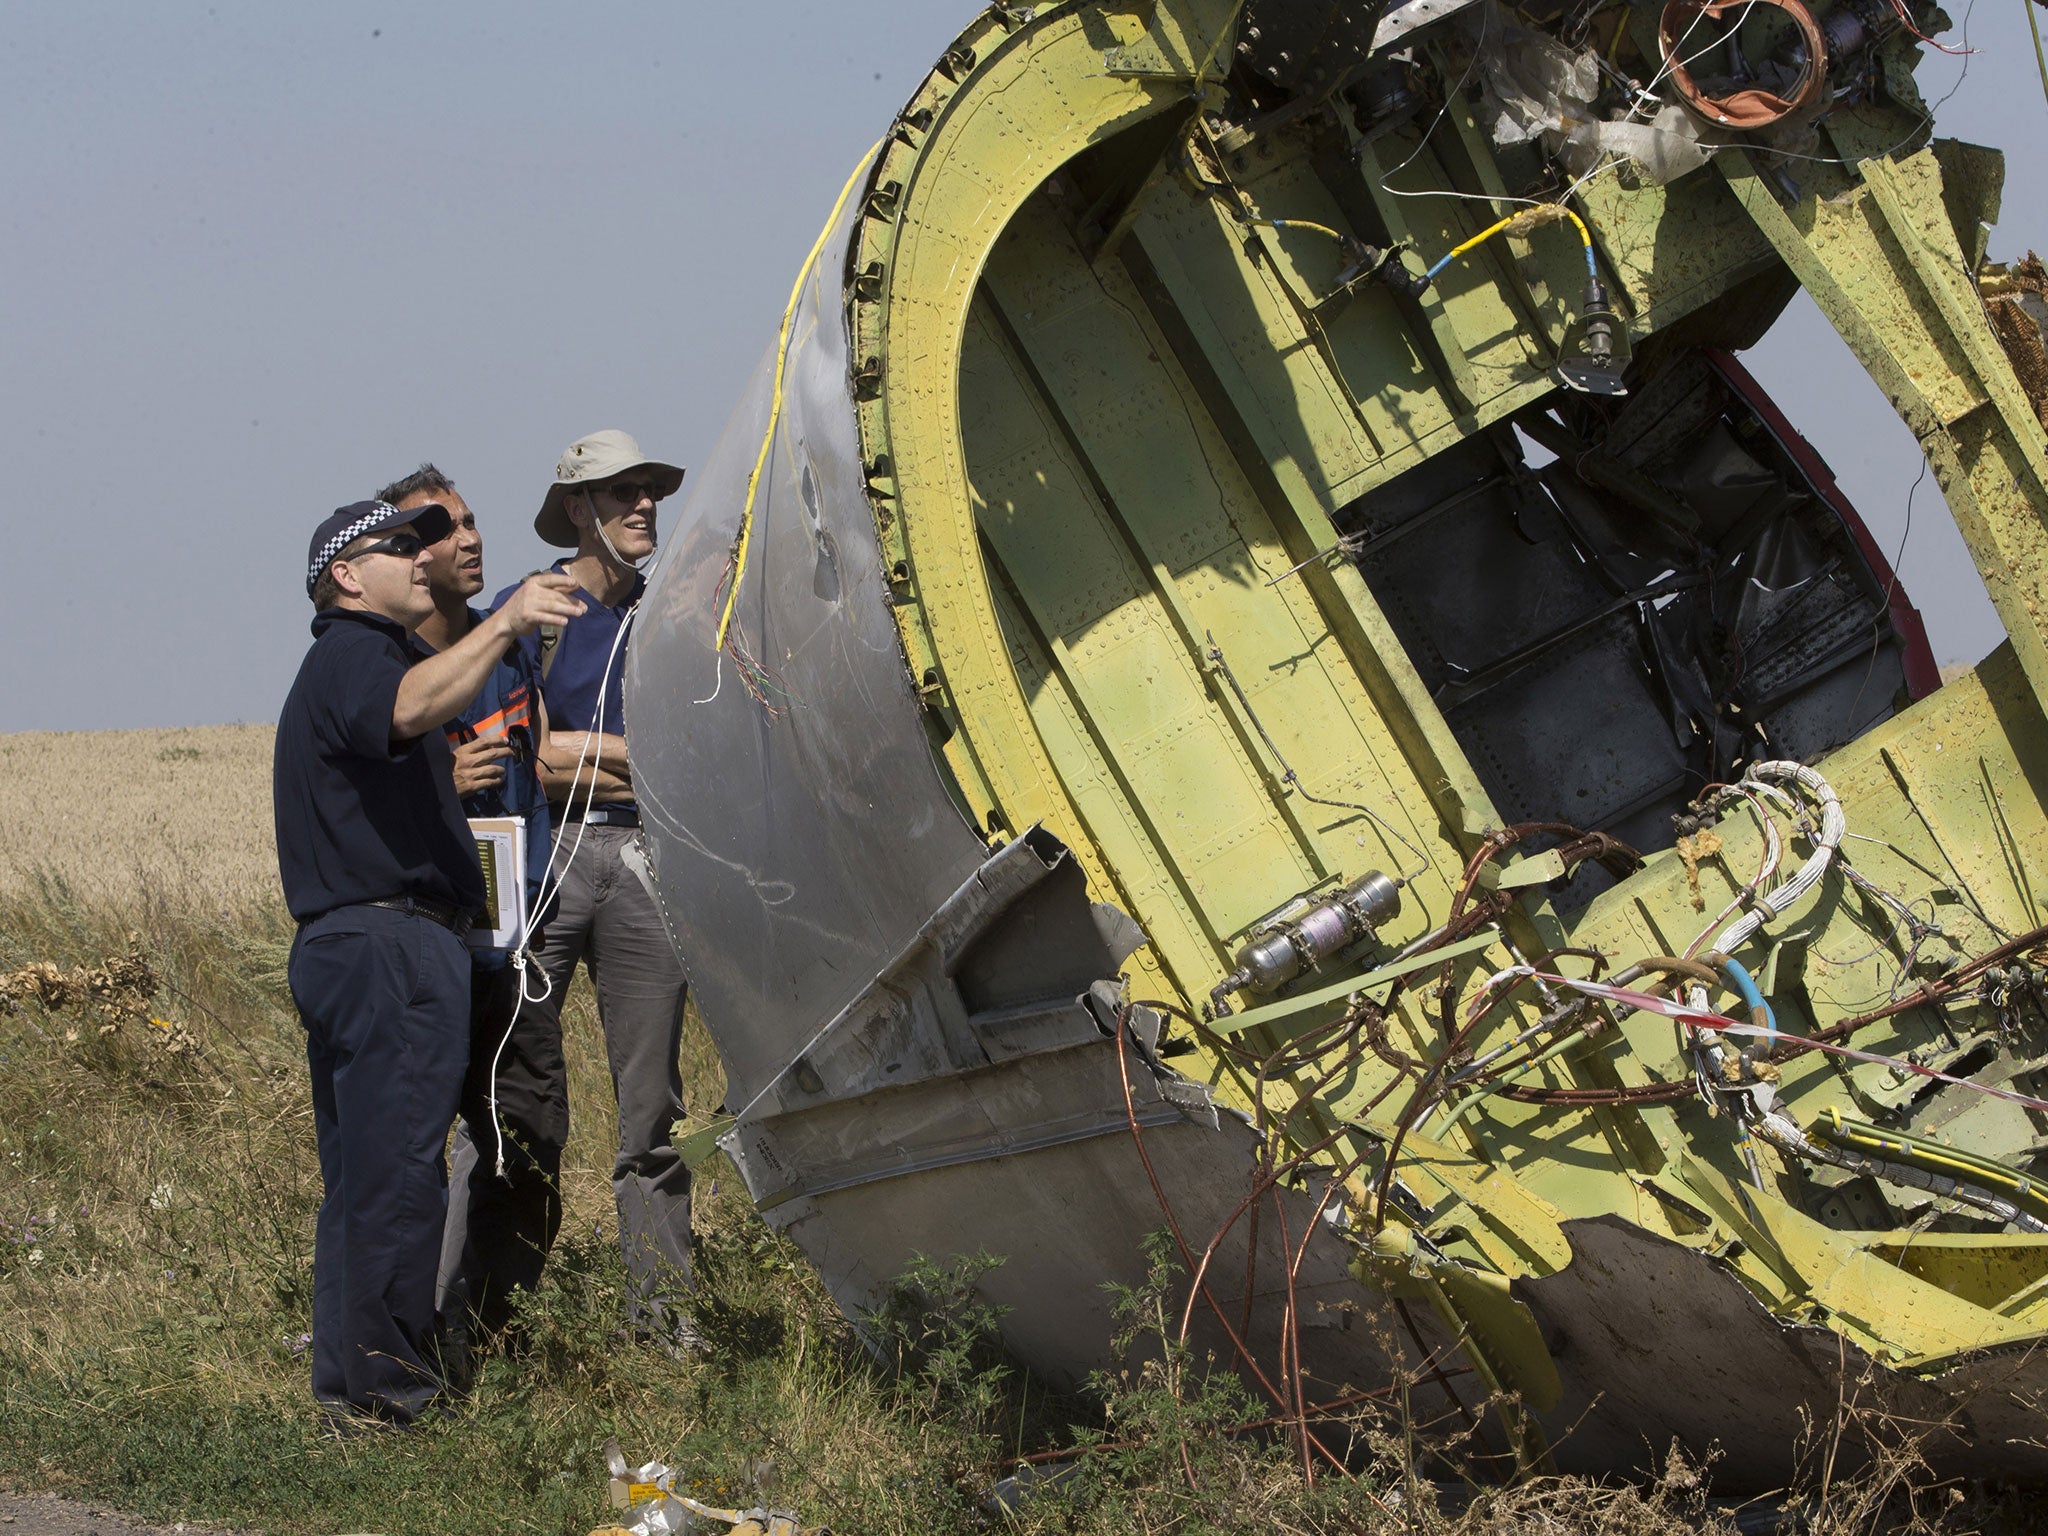 The wreckage of the MH17 flight downed in July is being cleared four months after it crashed and killed all 298 on board